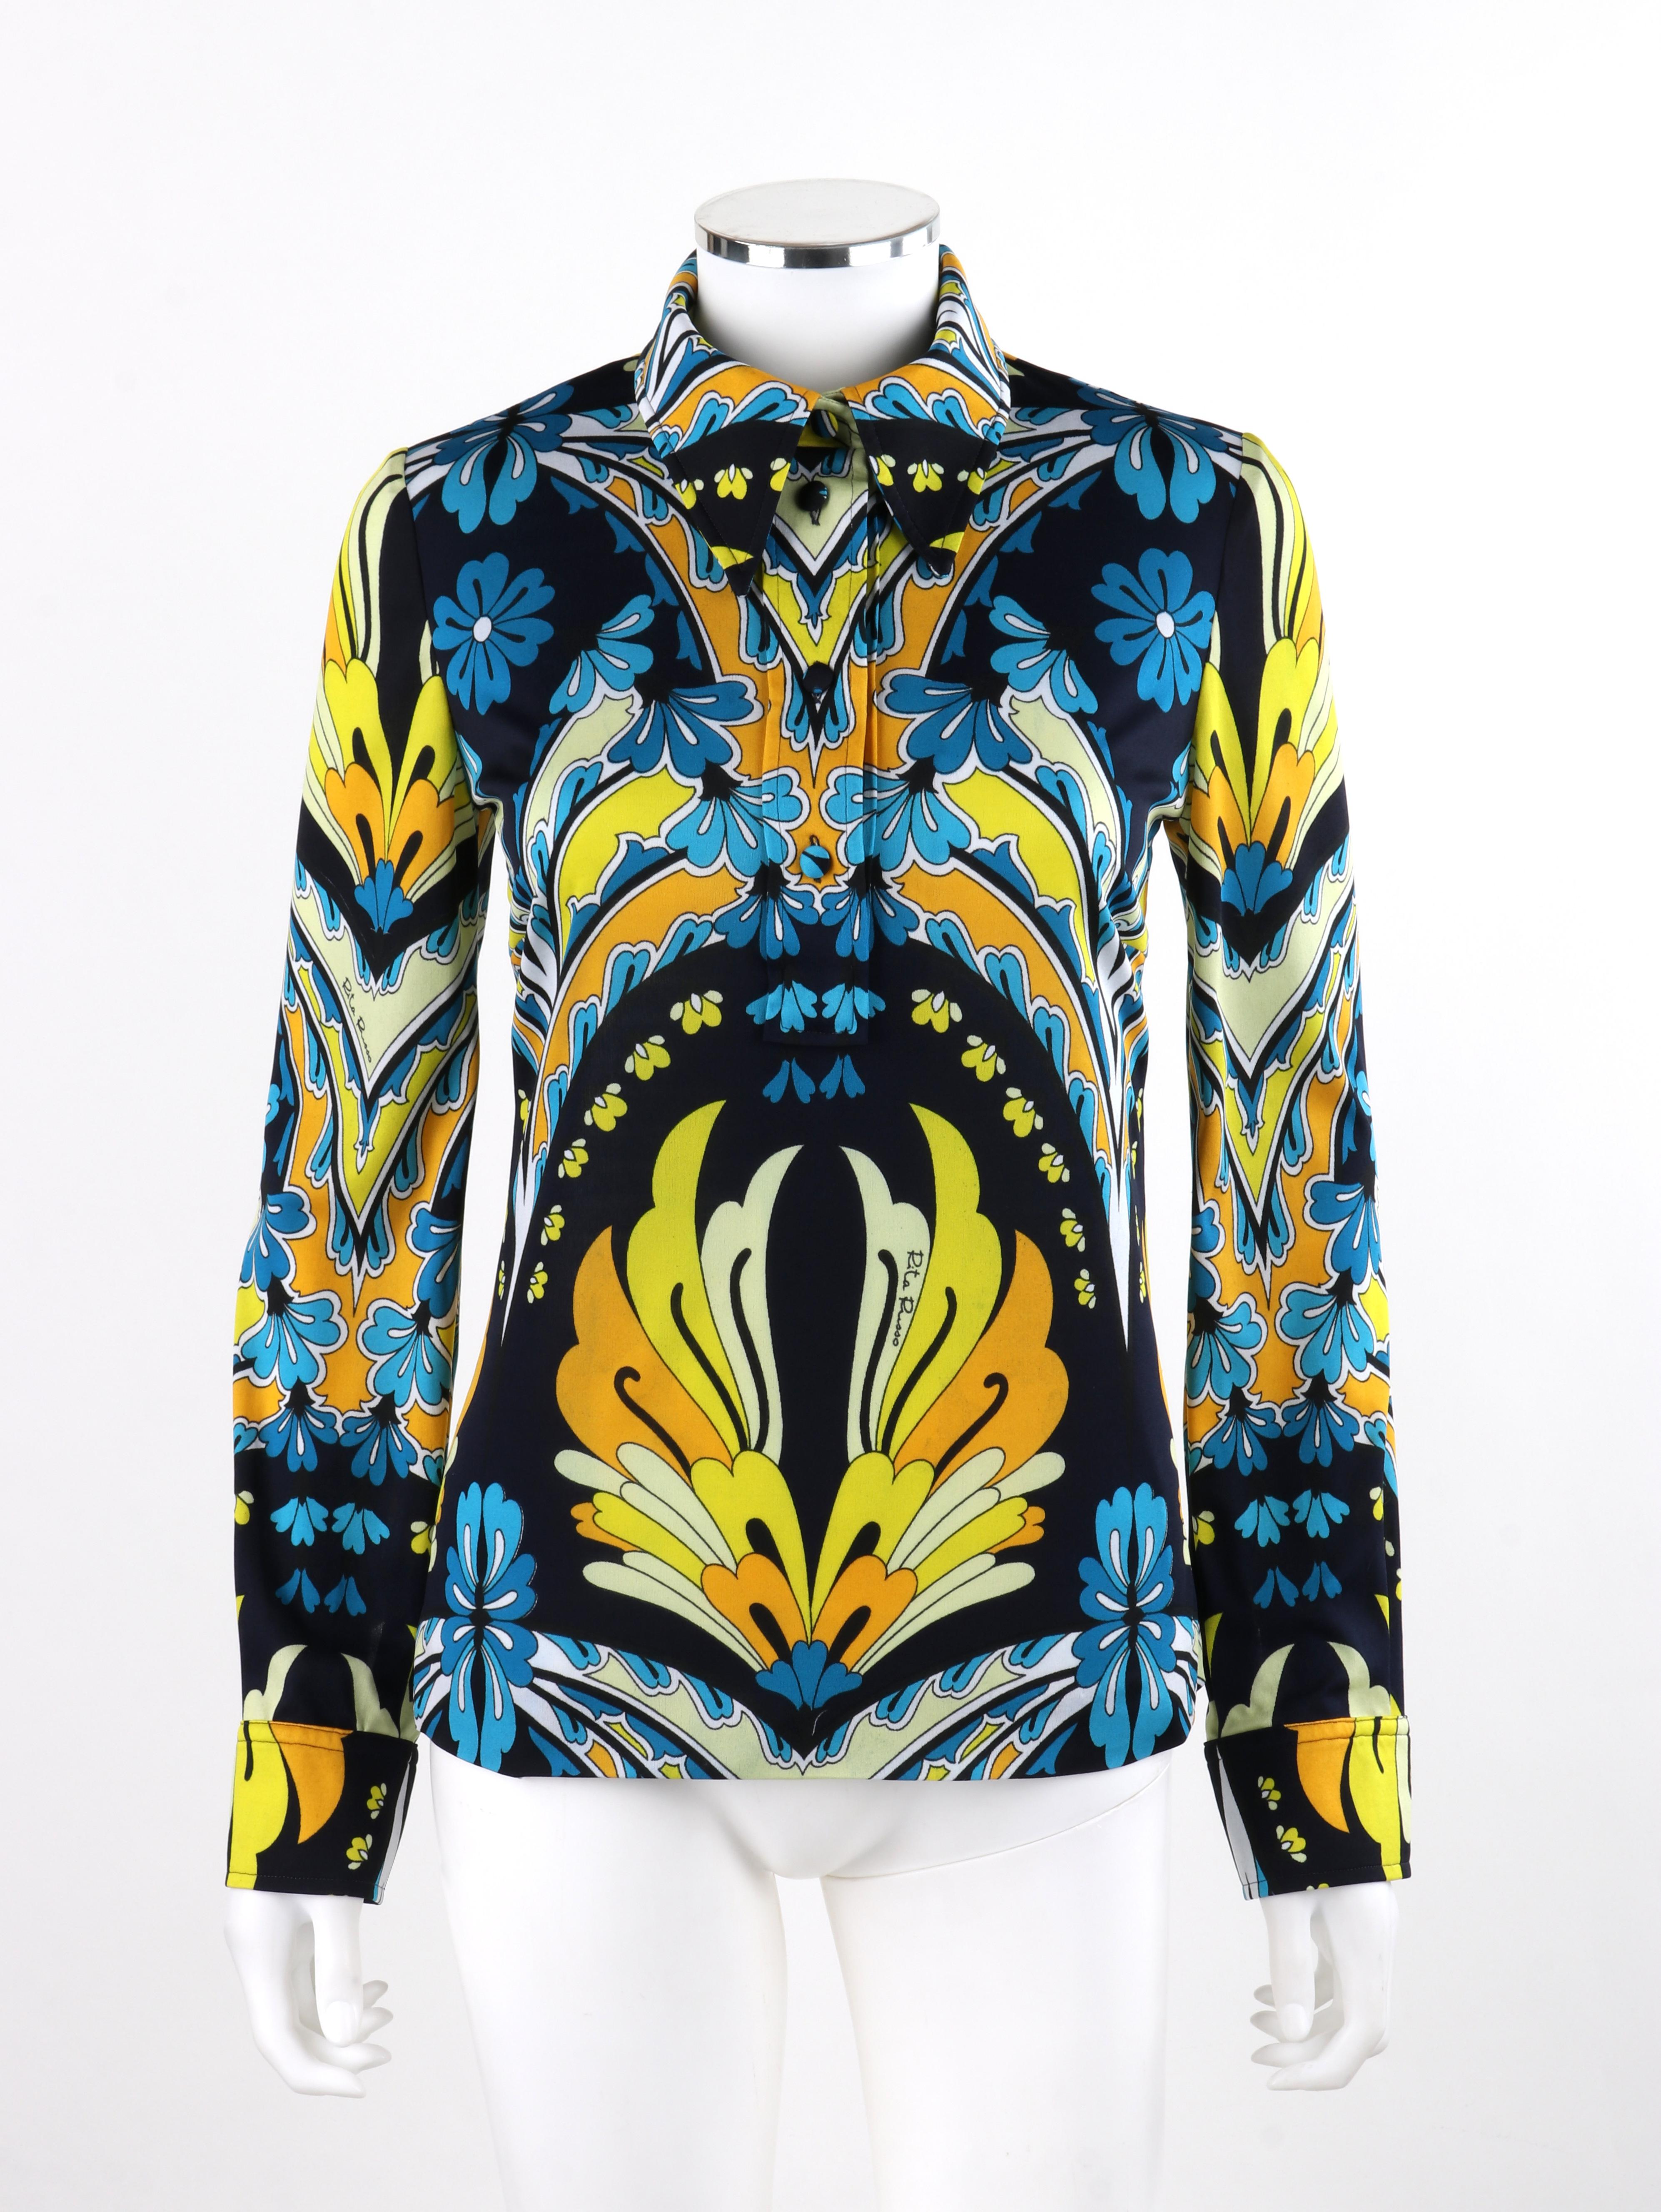 Women's RITA RUSSO c.1970s Blue Yellow Abstract Floral Half Button-Front Blouse + Sash For Sale